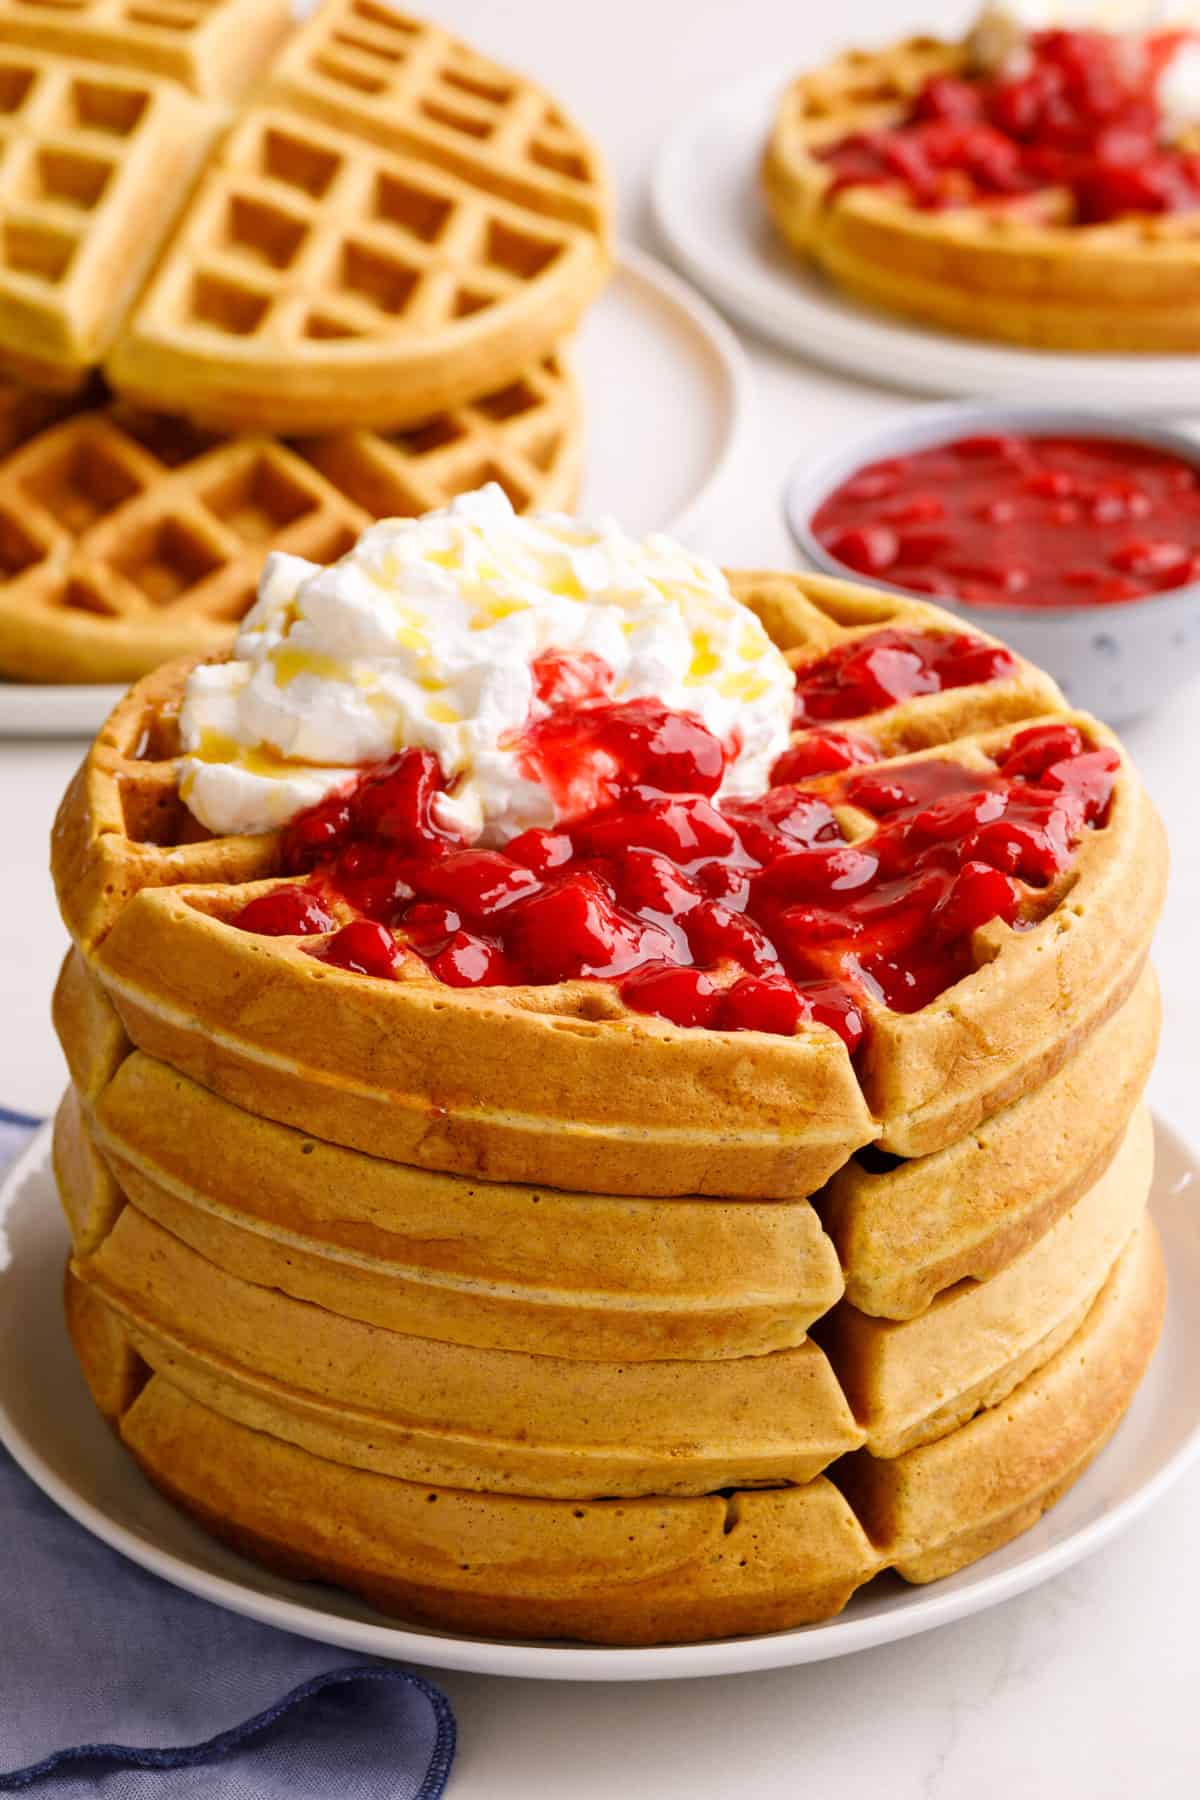 stack of four sourdough waffles topped with strawberry compote and whipped cream served on a white round plate